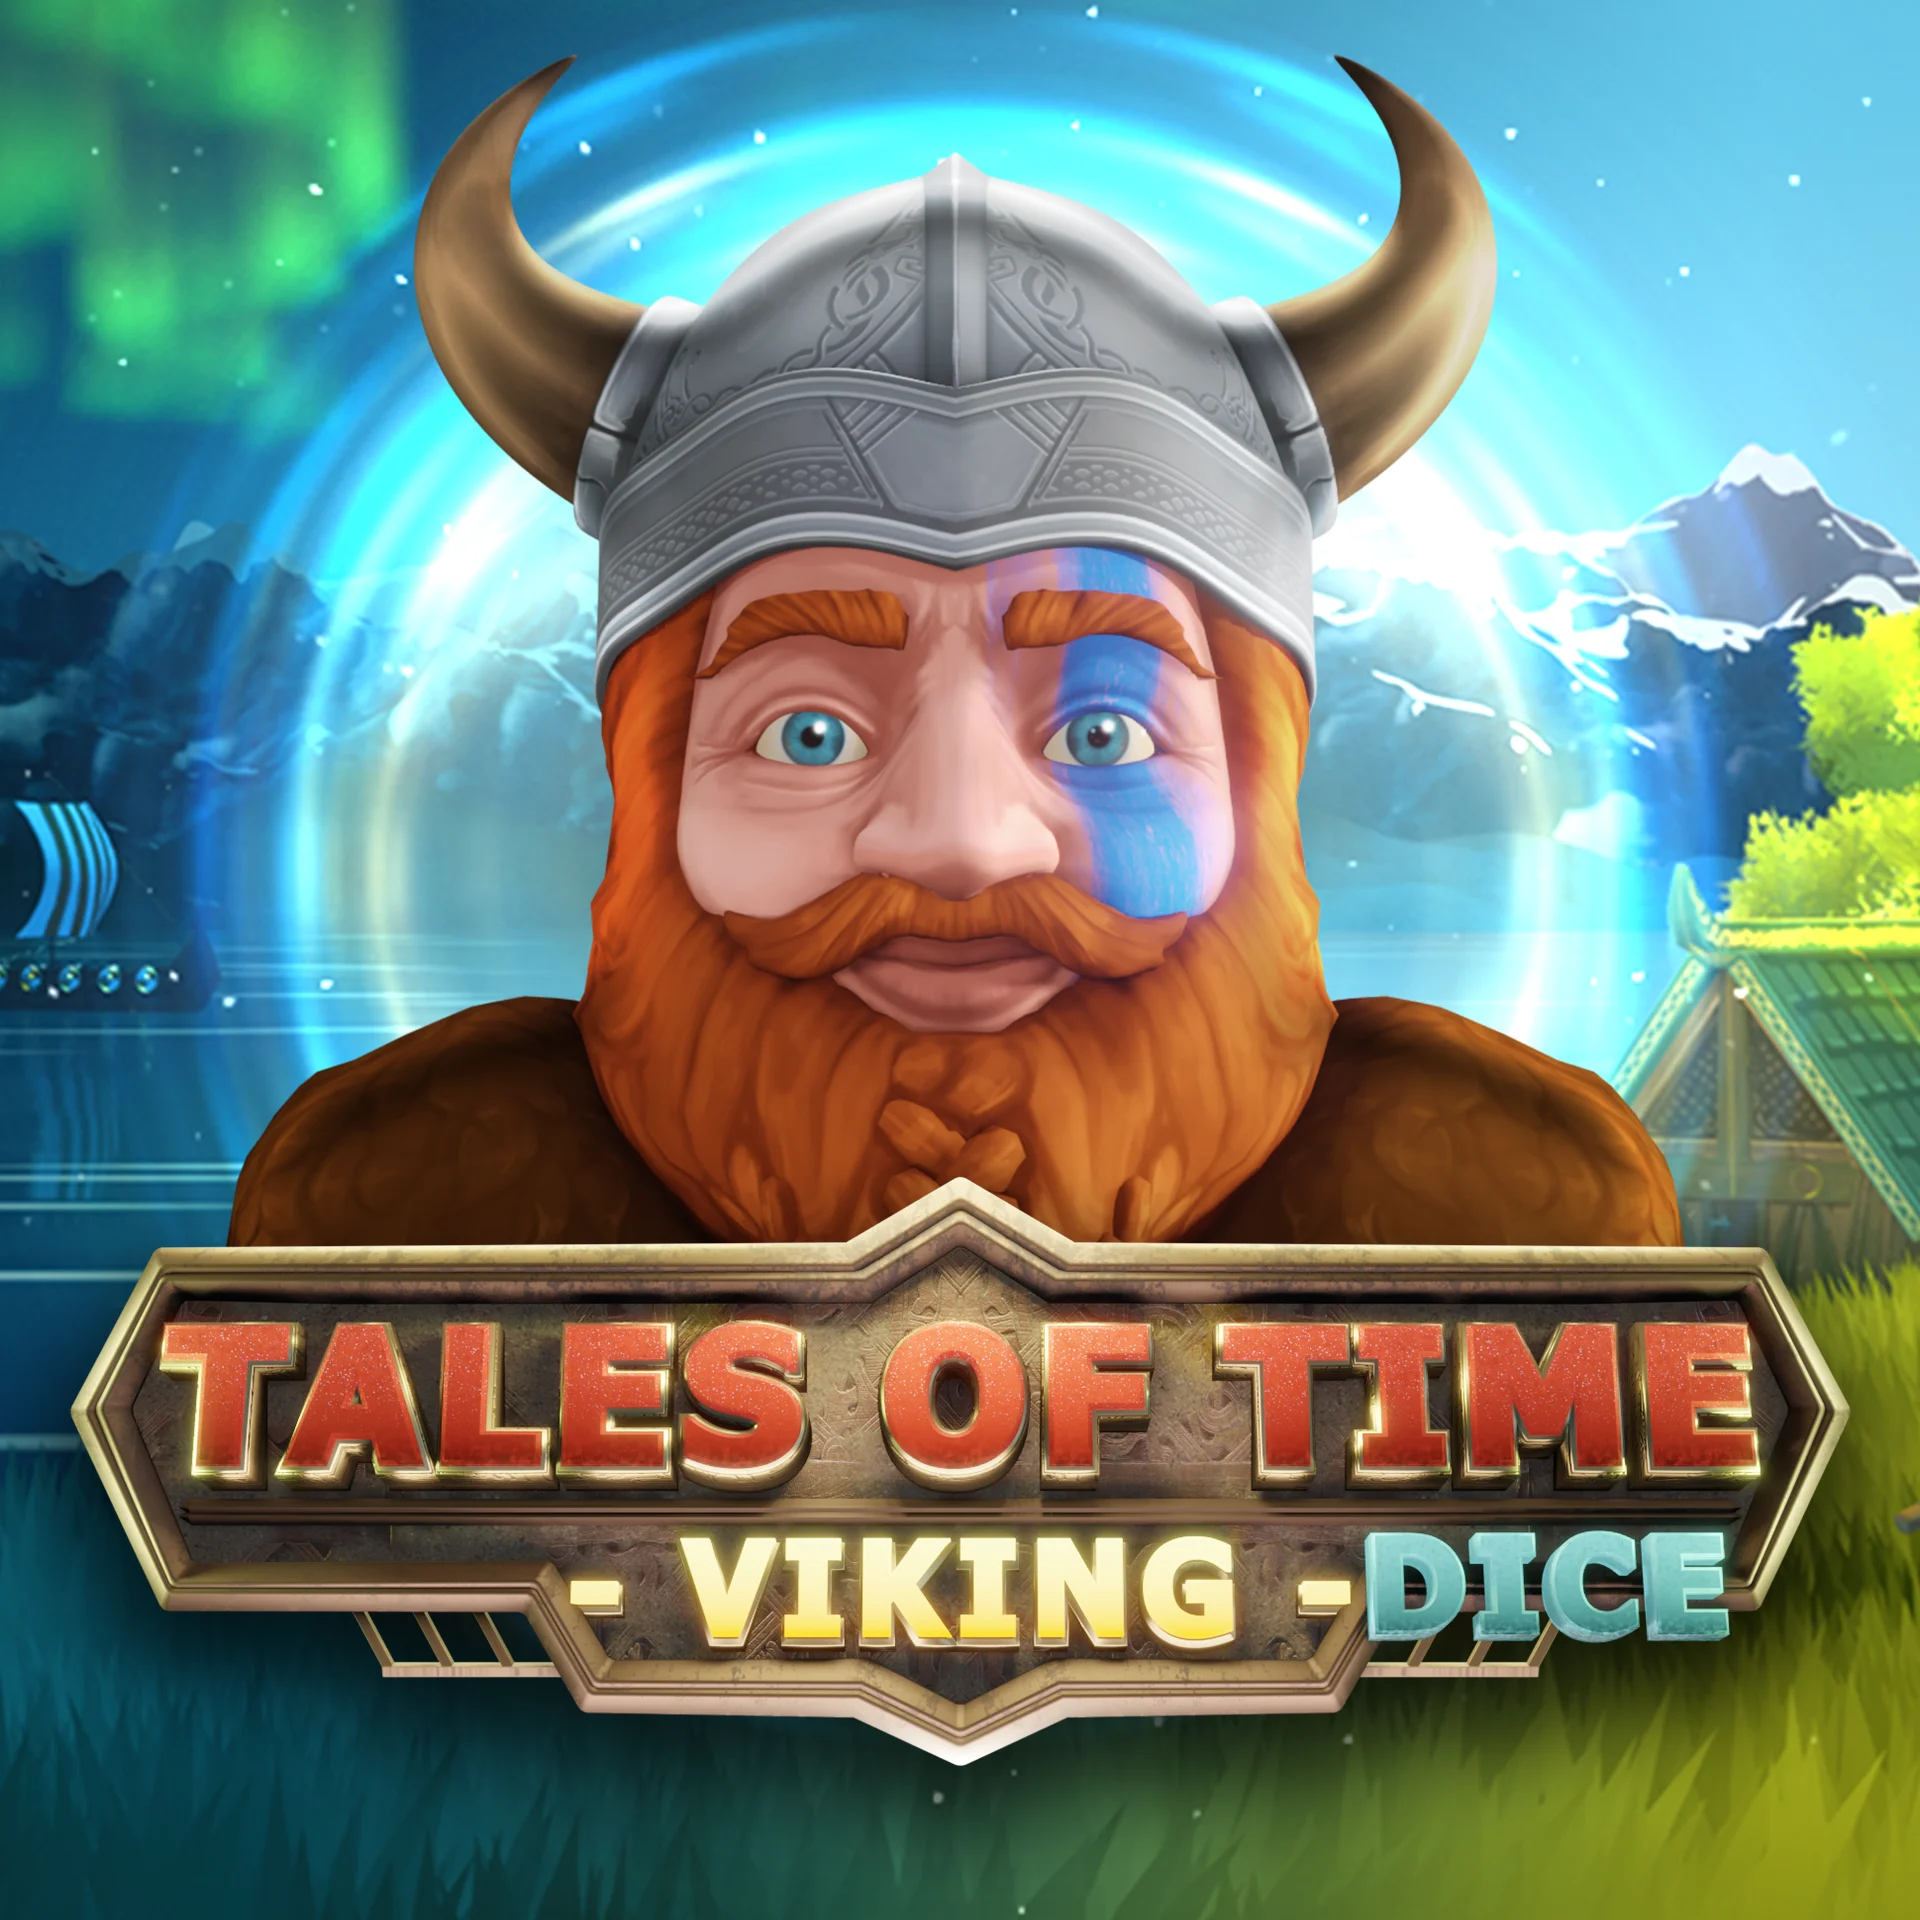 Play Tales Of Time Viking Dice on Starcasinodice.be online casino